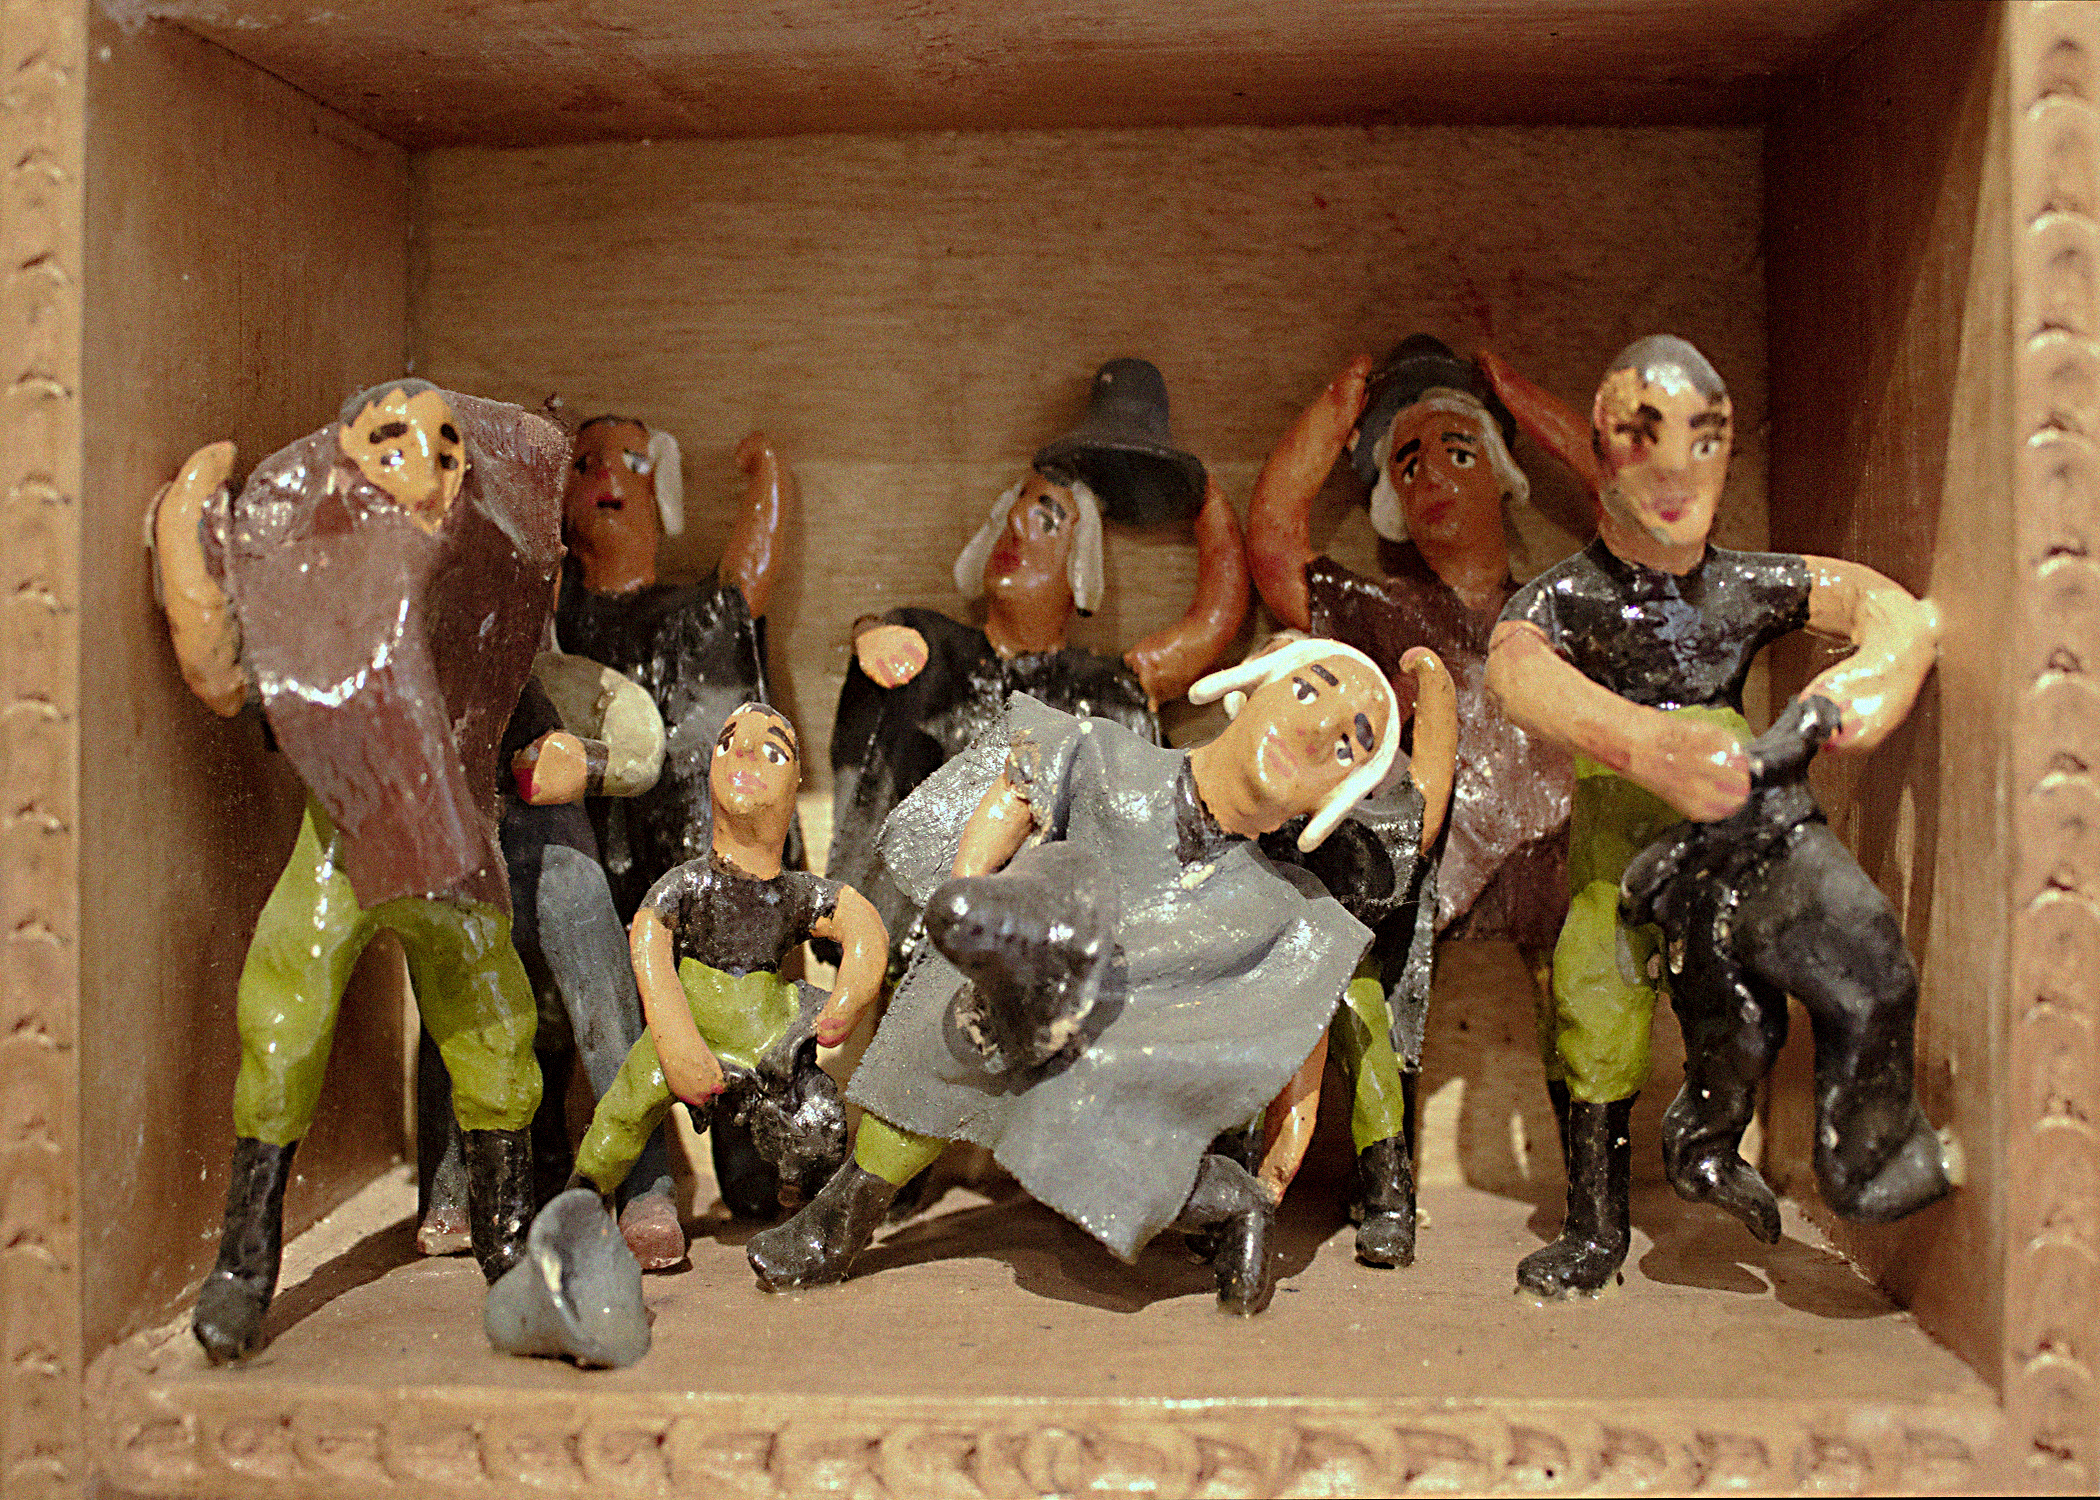 A scene called Disguise within a retablo. A group of nine humanlike figurines are portrayed as dressing themselves in grey and brown ponchos and grey hats.